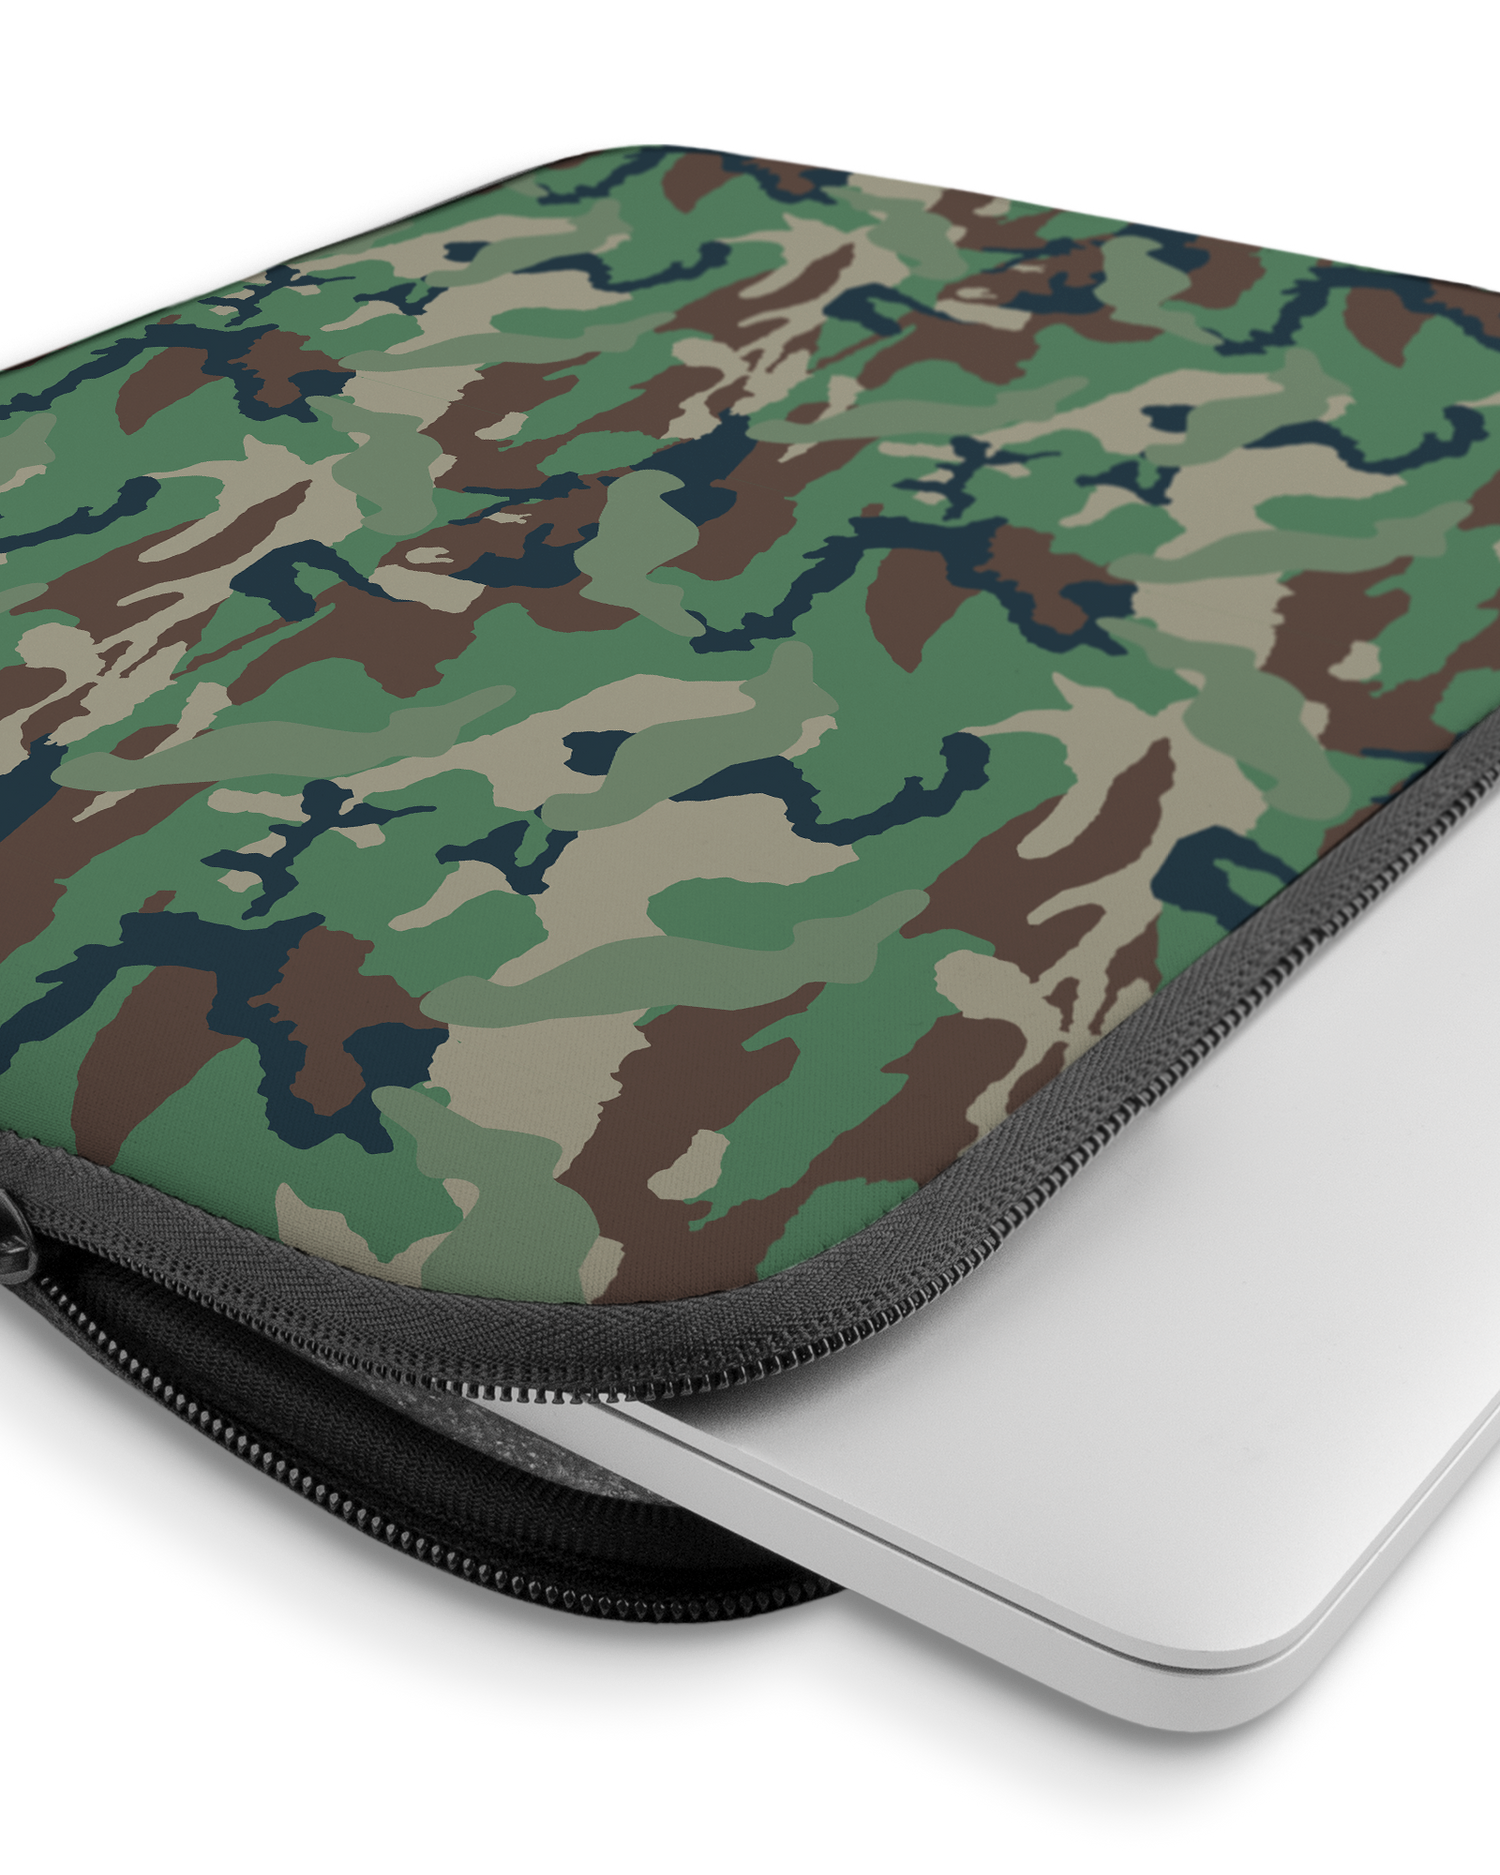 Green and Brown Camo Laptop Case 15 inch with device inside